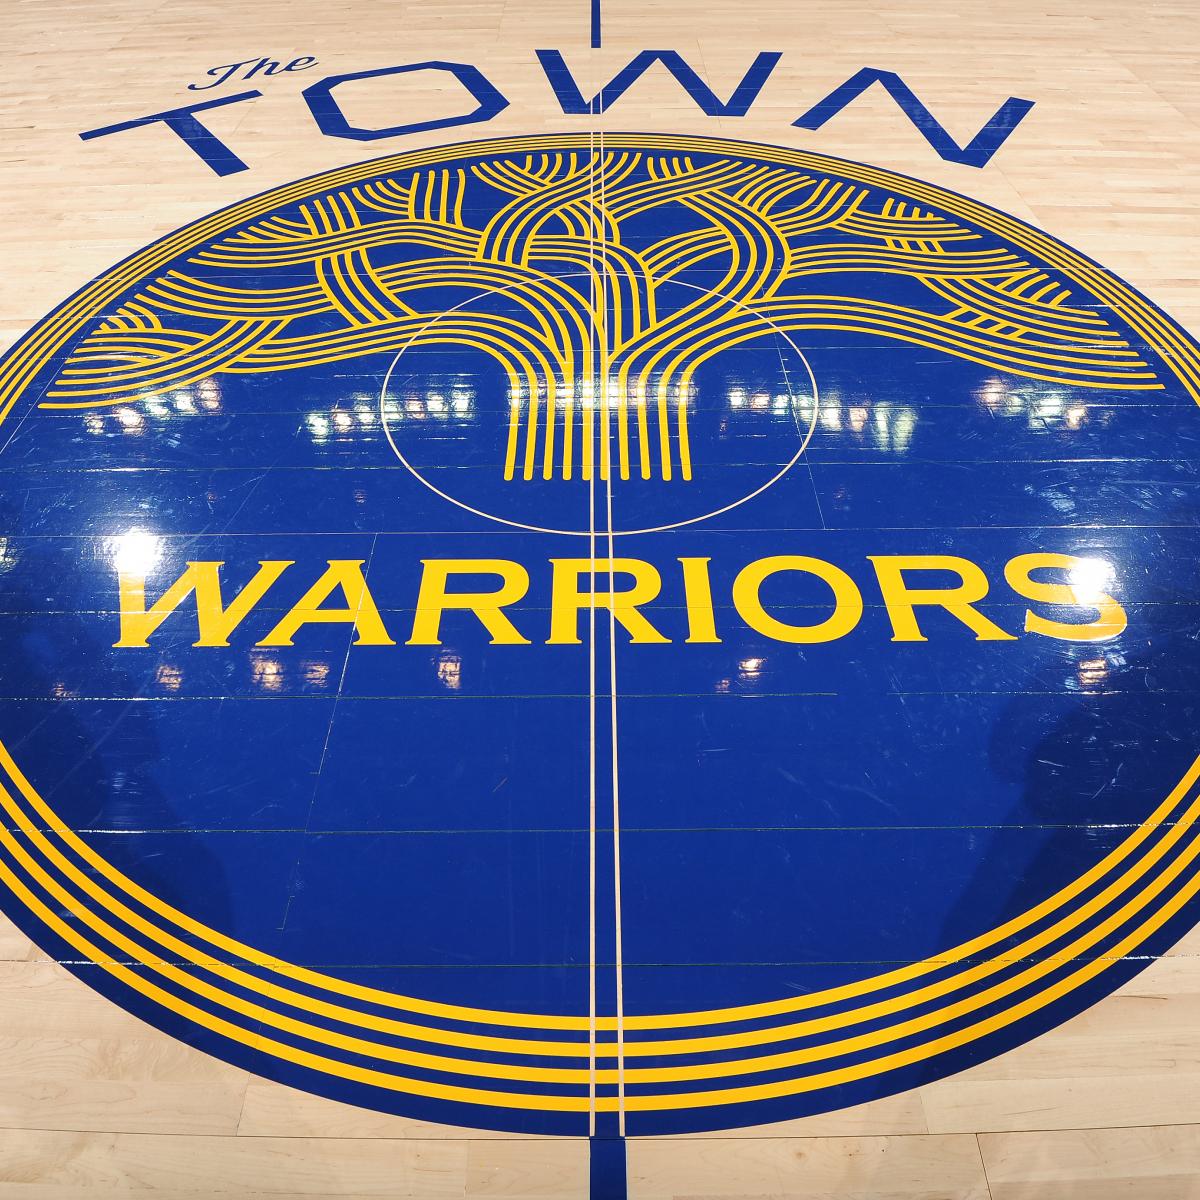 Warriors Trade News: GSW Acquires Hawks' No. 41 Draft Pick for $1.3M